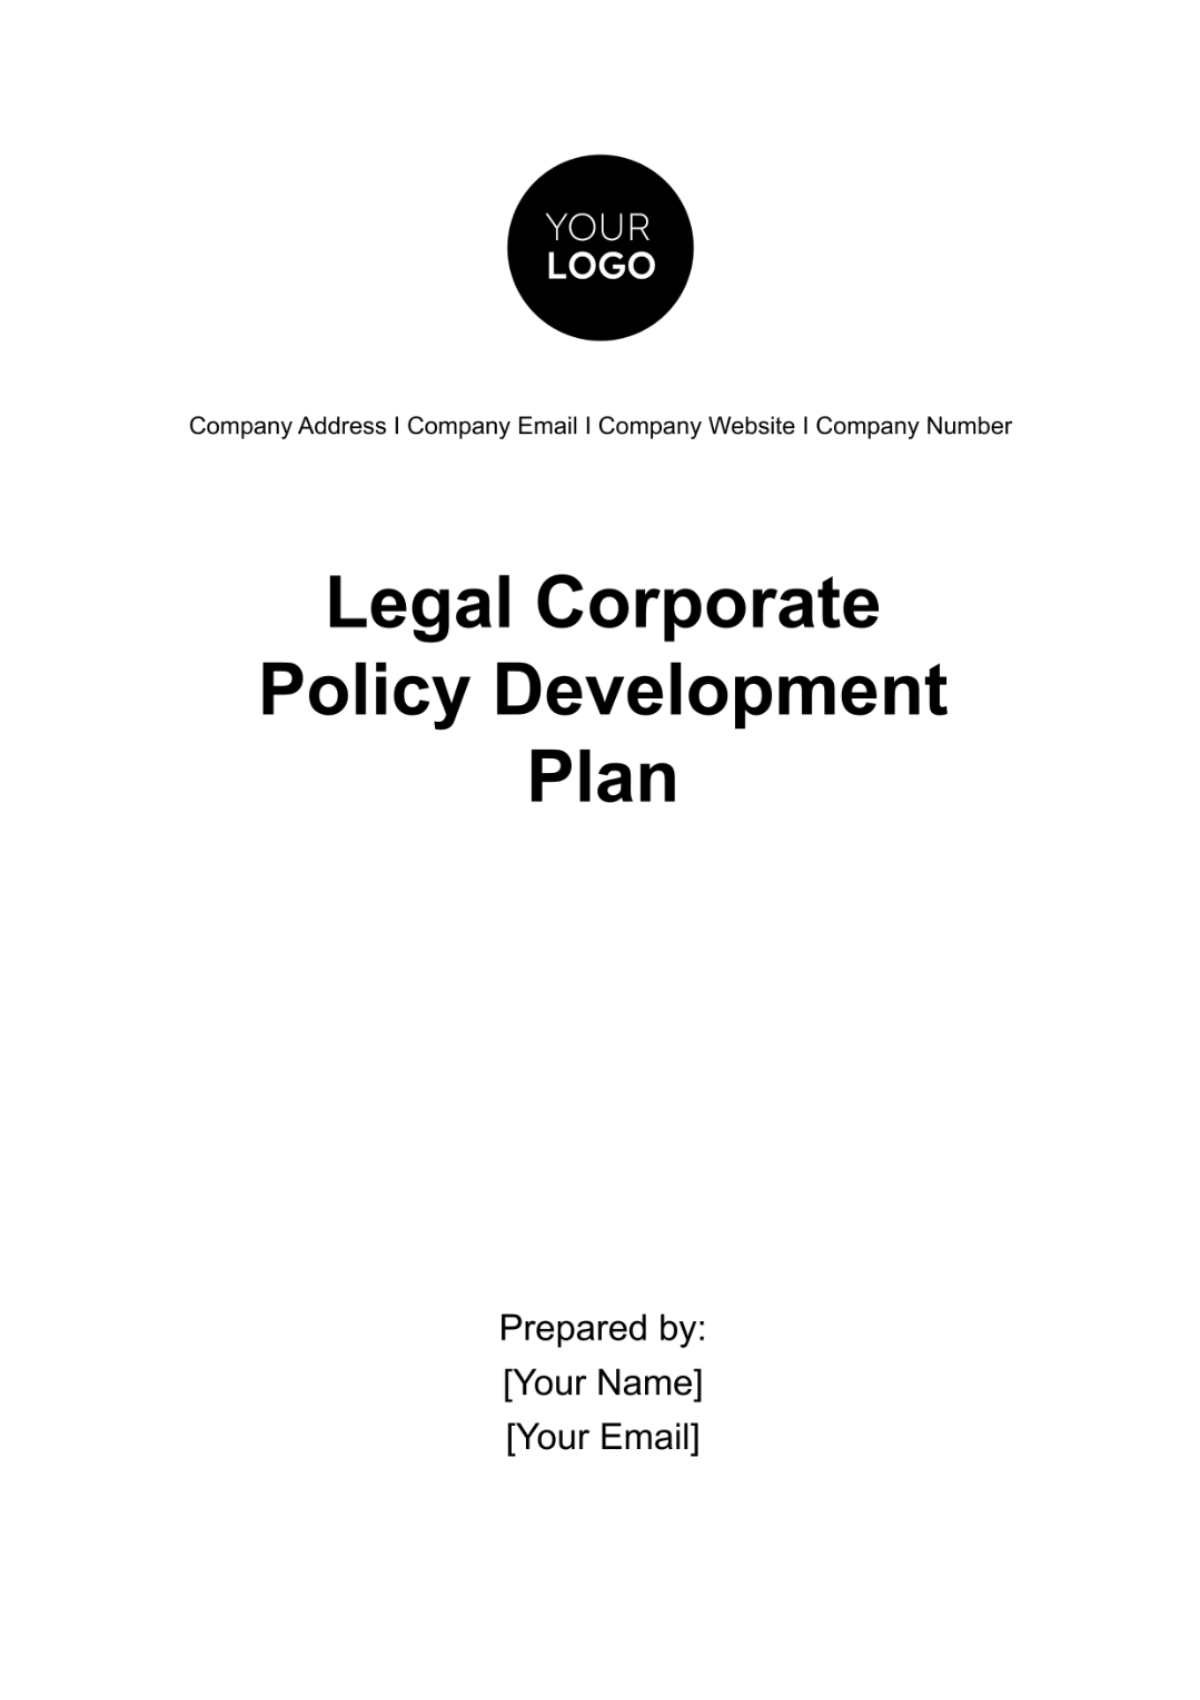 Legal Corporate Policy Development Plan Template